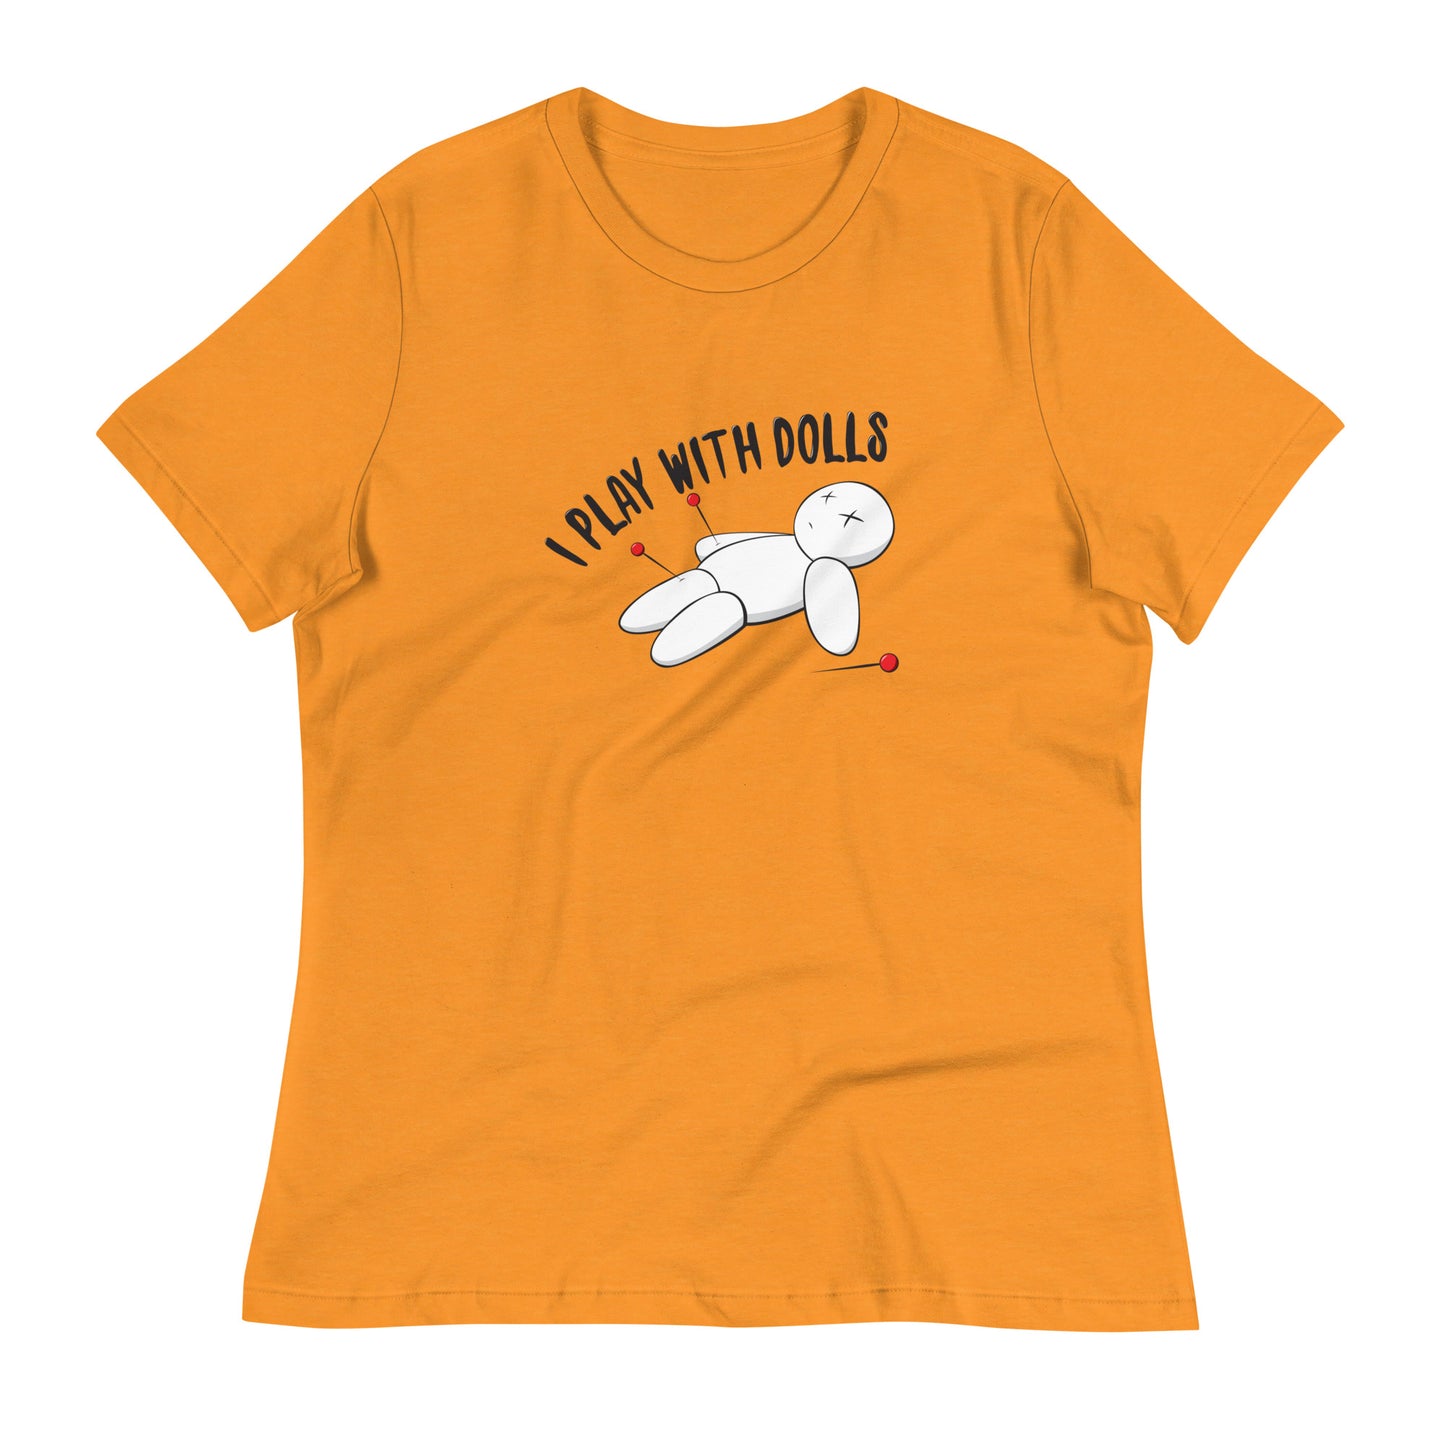 Marmalade (orange yellow) women's relaxed fit t-shirt with graphic of white voodoo doll with Xs for eyes stuck with several pins and text "I PLAY WITH DOLLS"